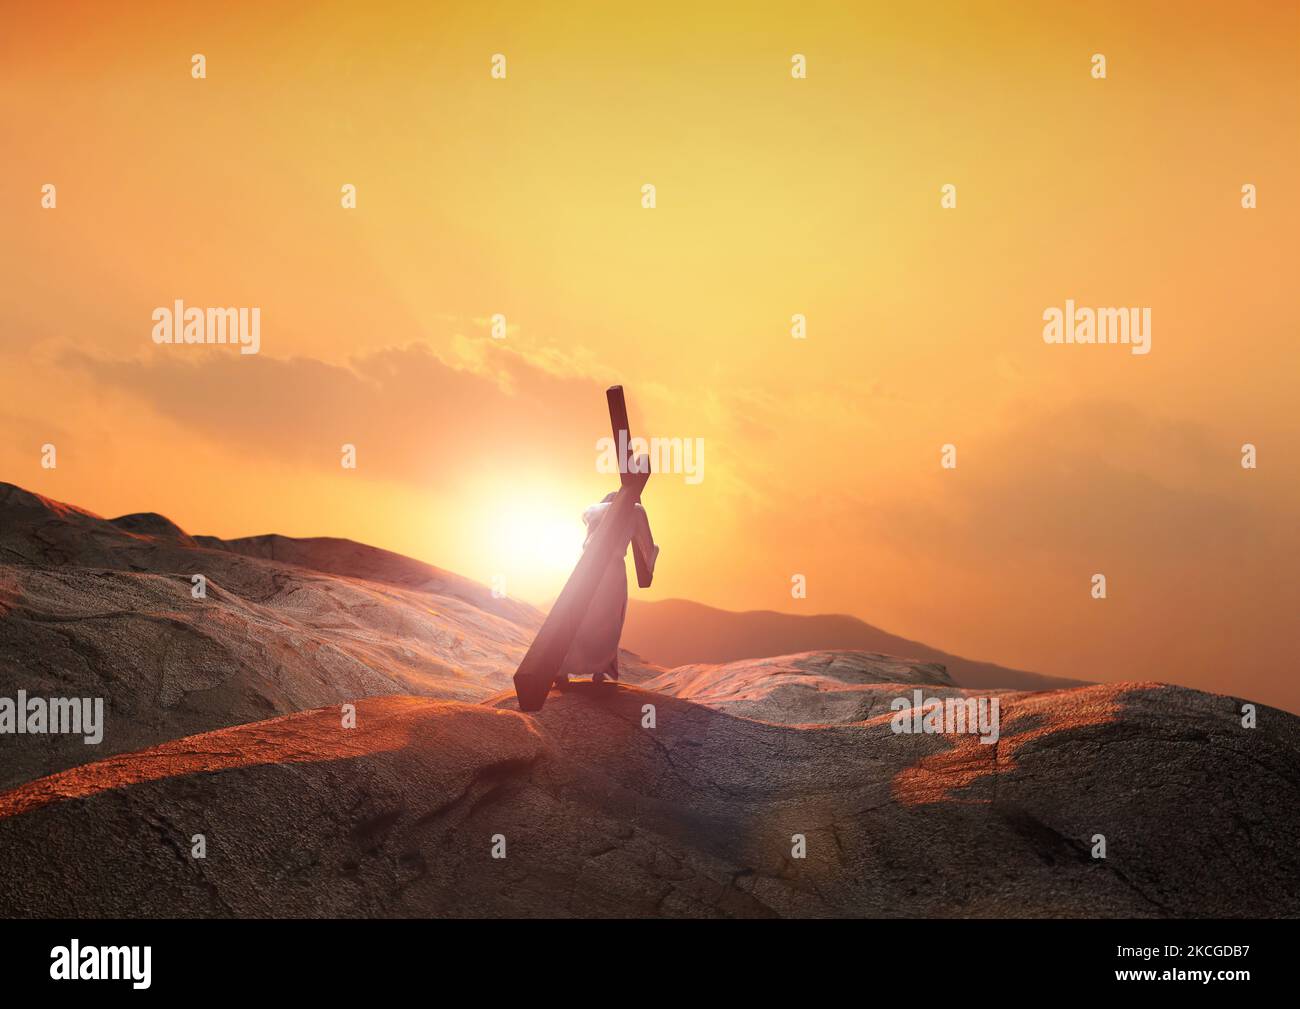 Jesus carrying the cross of suffering that symbolizes the light and clouds of the hill at sunset and death, sacrifice, and resurrection Stock Photo